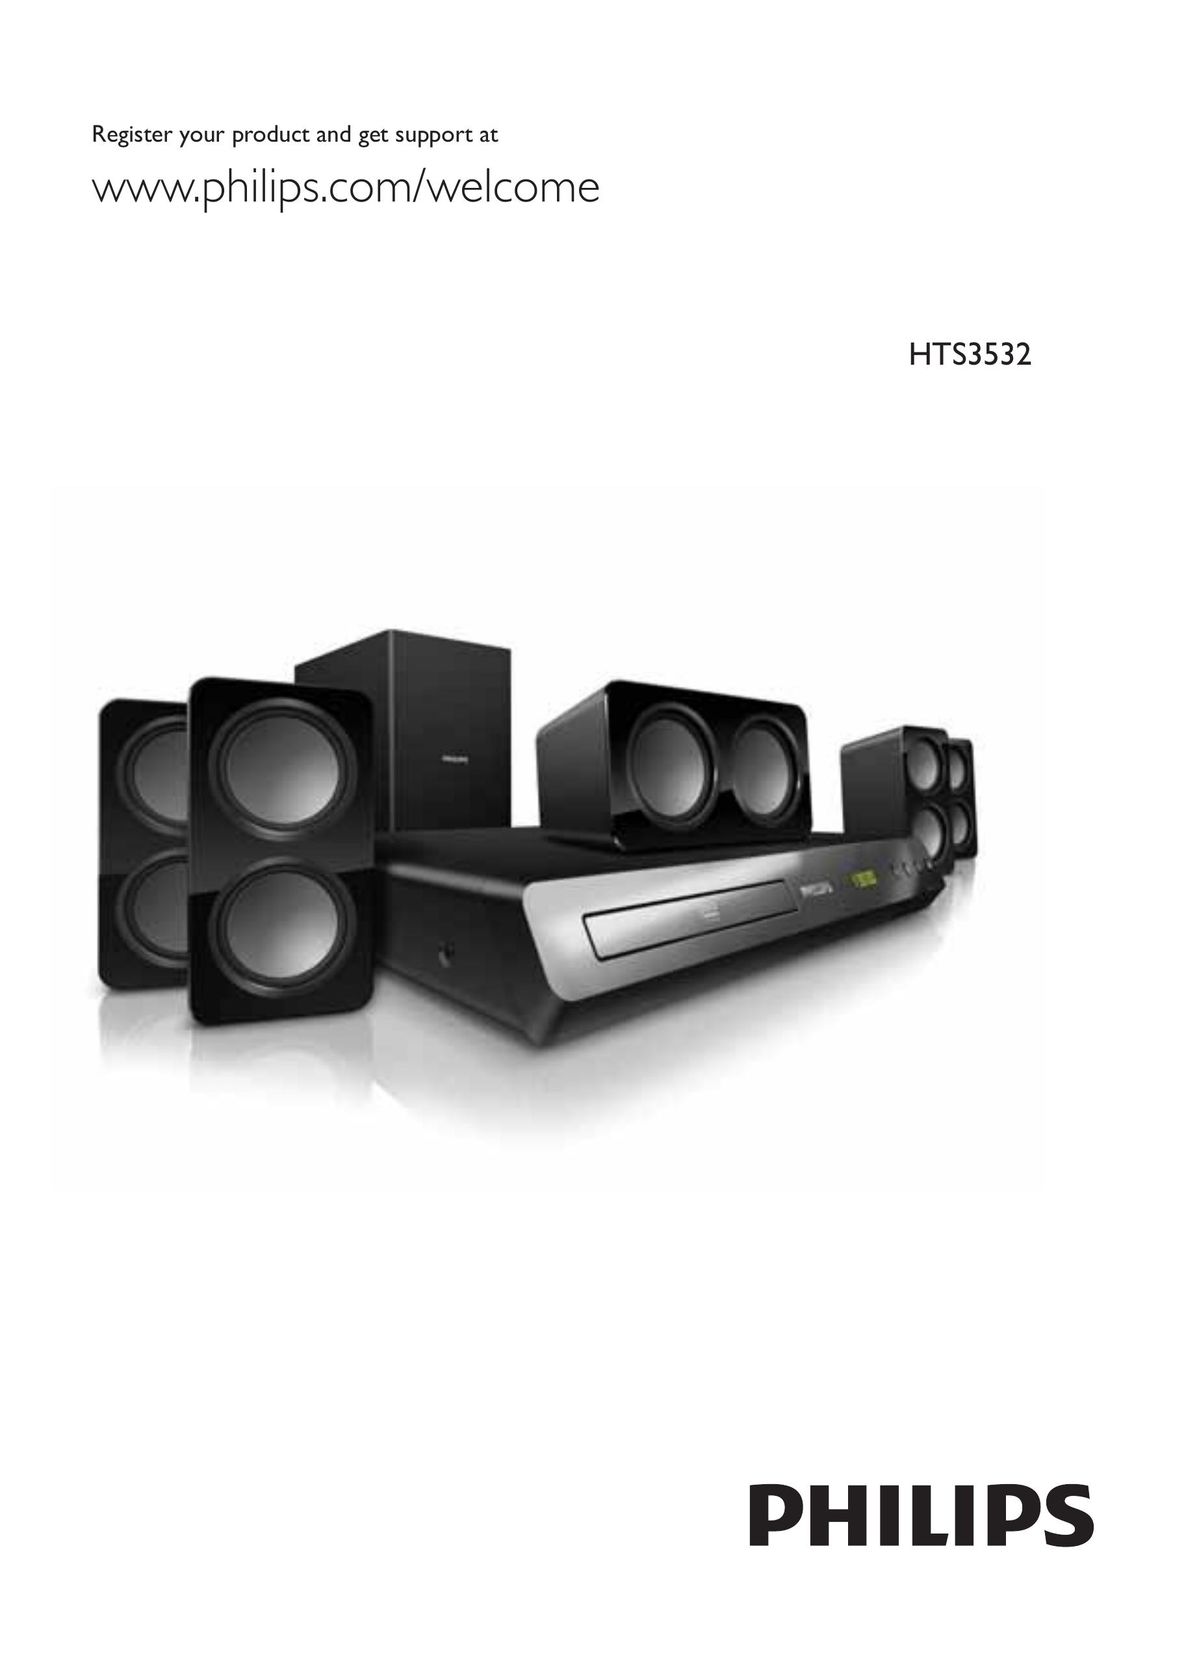 Philips HTS3532 Video Game Sound System User Manual